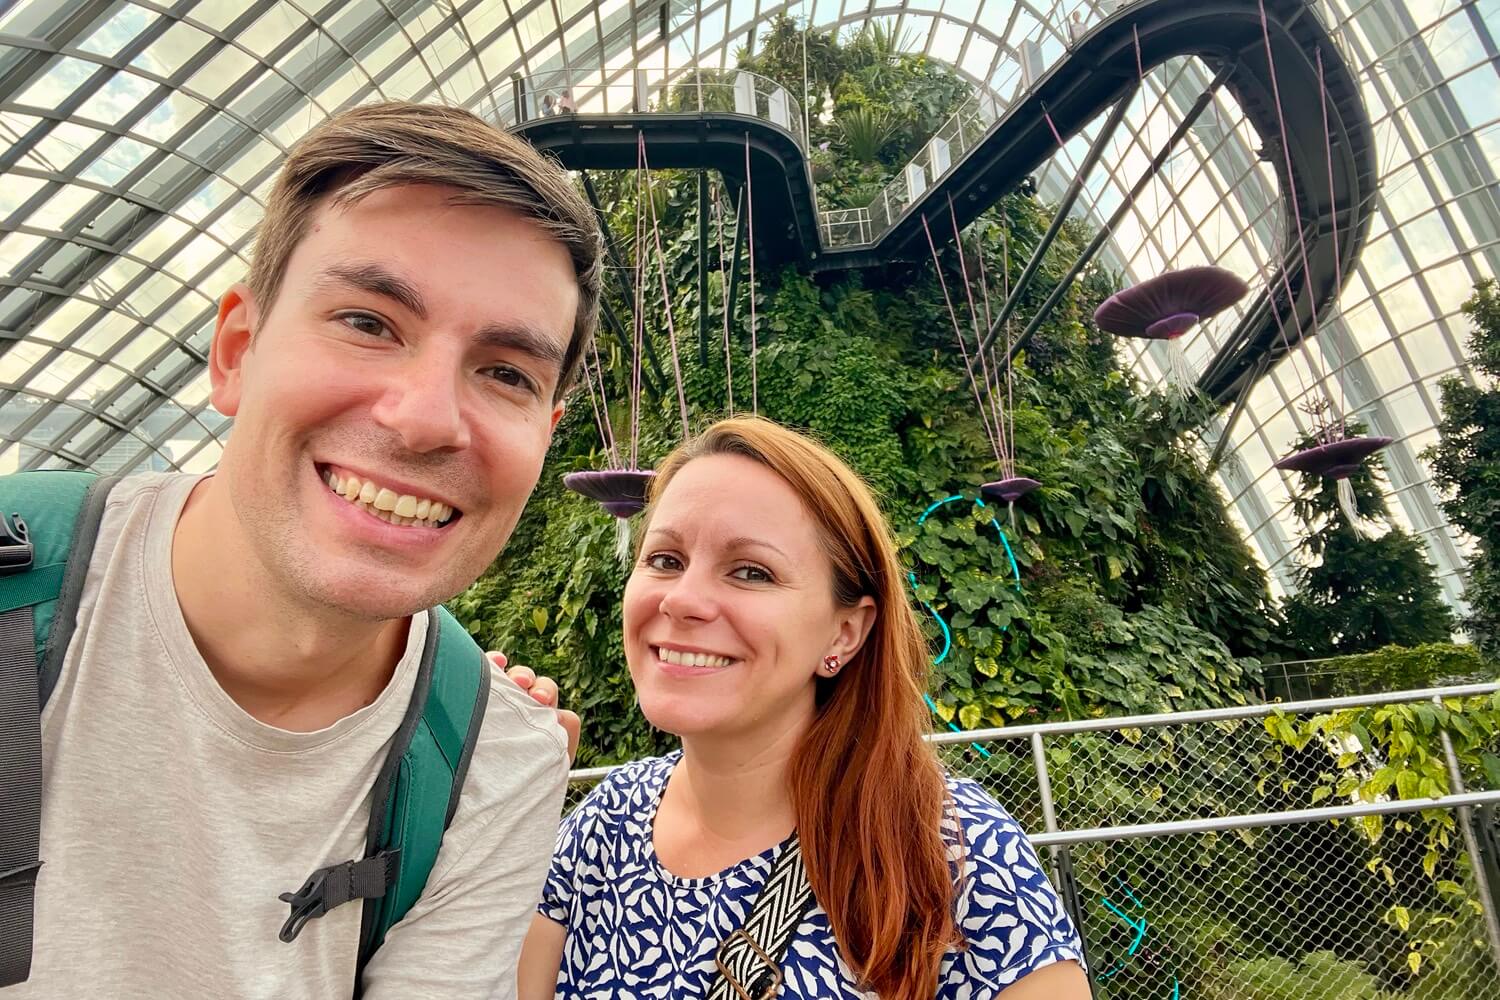 Matt and Jade pose for a selfie in Singapore’s Cloud Forest Dome.